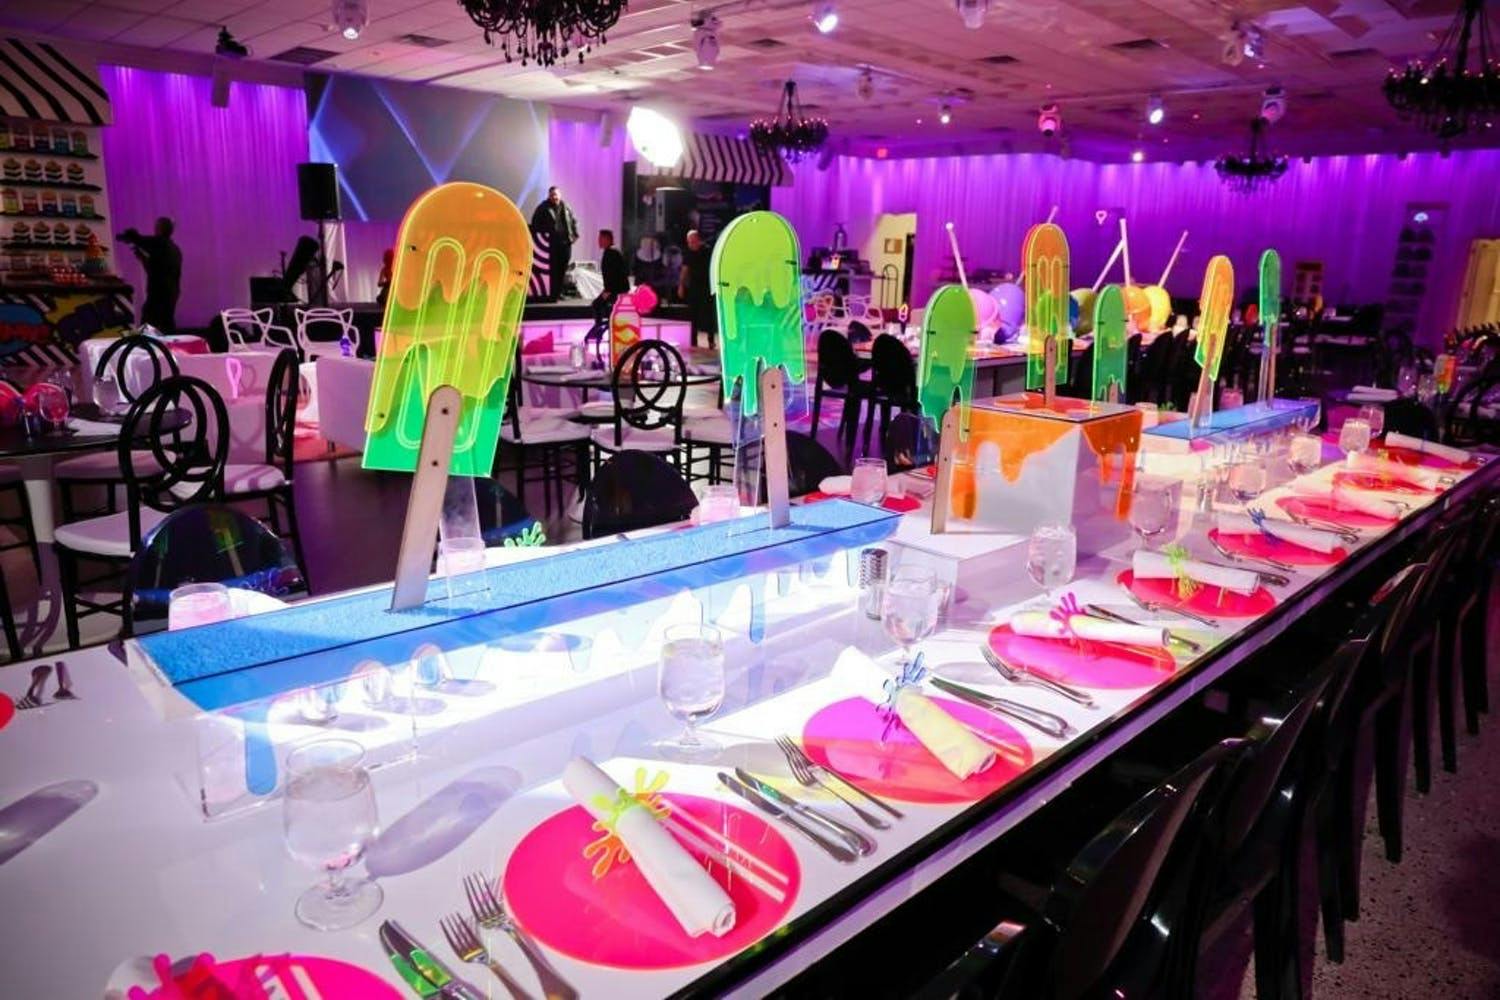 Colorful Candy-Themed Bat Mitzvah Reception with Acrylic Candy Bar Centerpieces | PartySlate